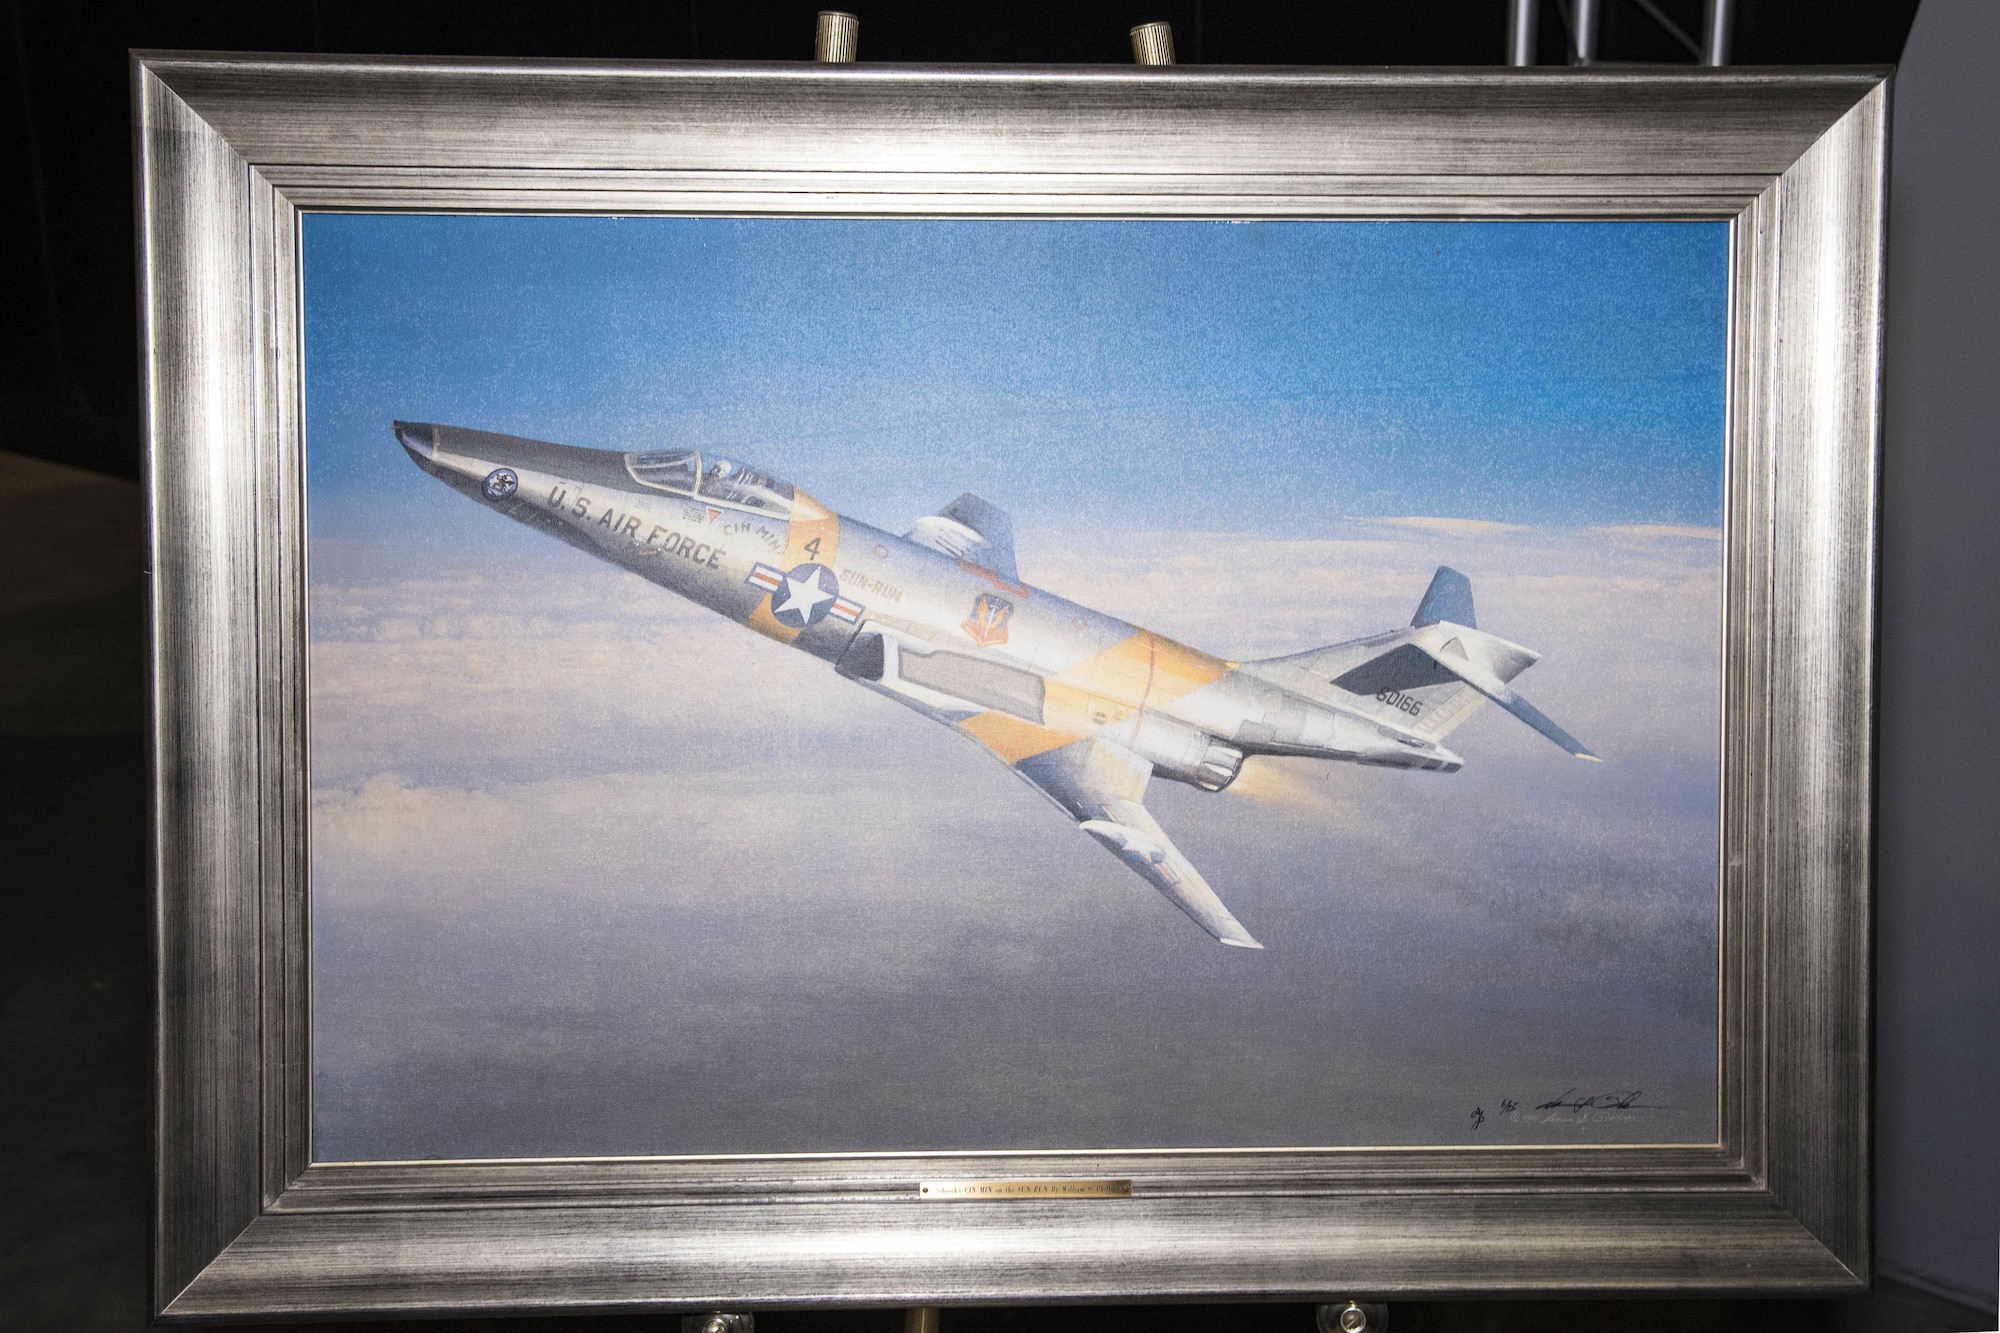 DAYTON, Ohio - A giclee of "Schrek's CIN MIN on the SUN-RUN" by aviation artist William S. Phillips in the Southeast Asia War Gallery at the National Museum of the U.S. Air Force. (U.S. Air Force photo)